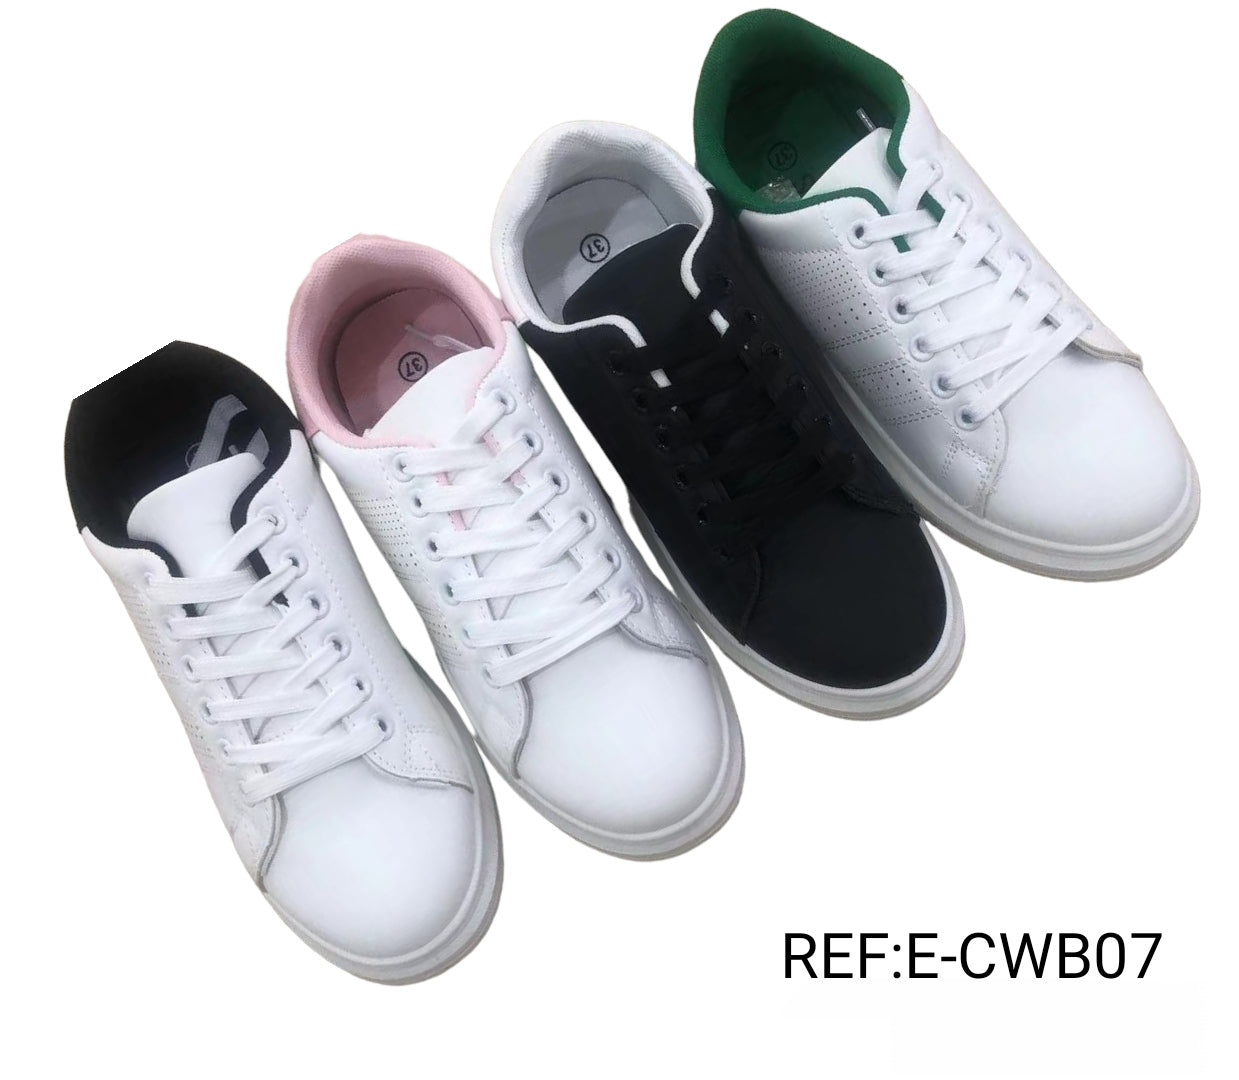 Simple Women's Basketball Shoes (x12)